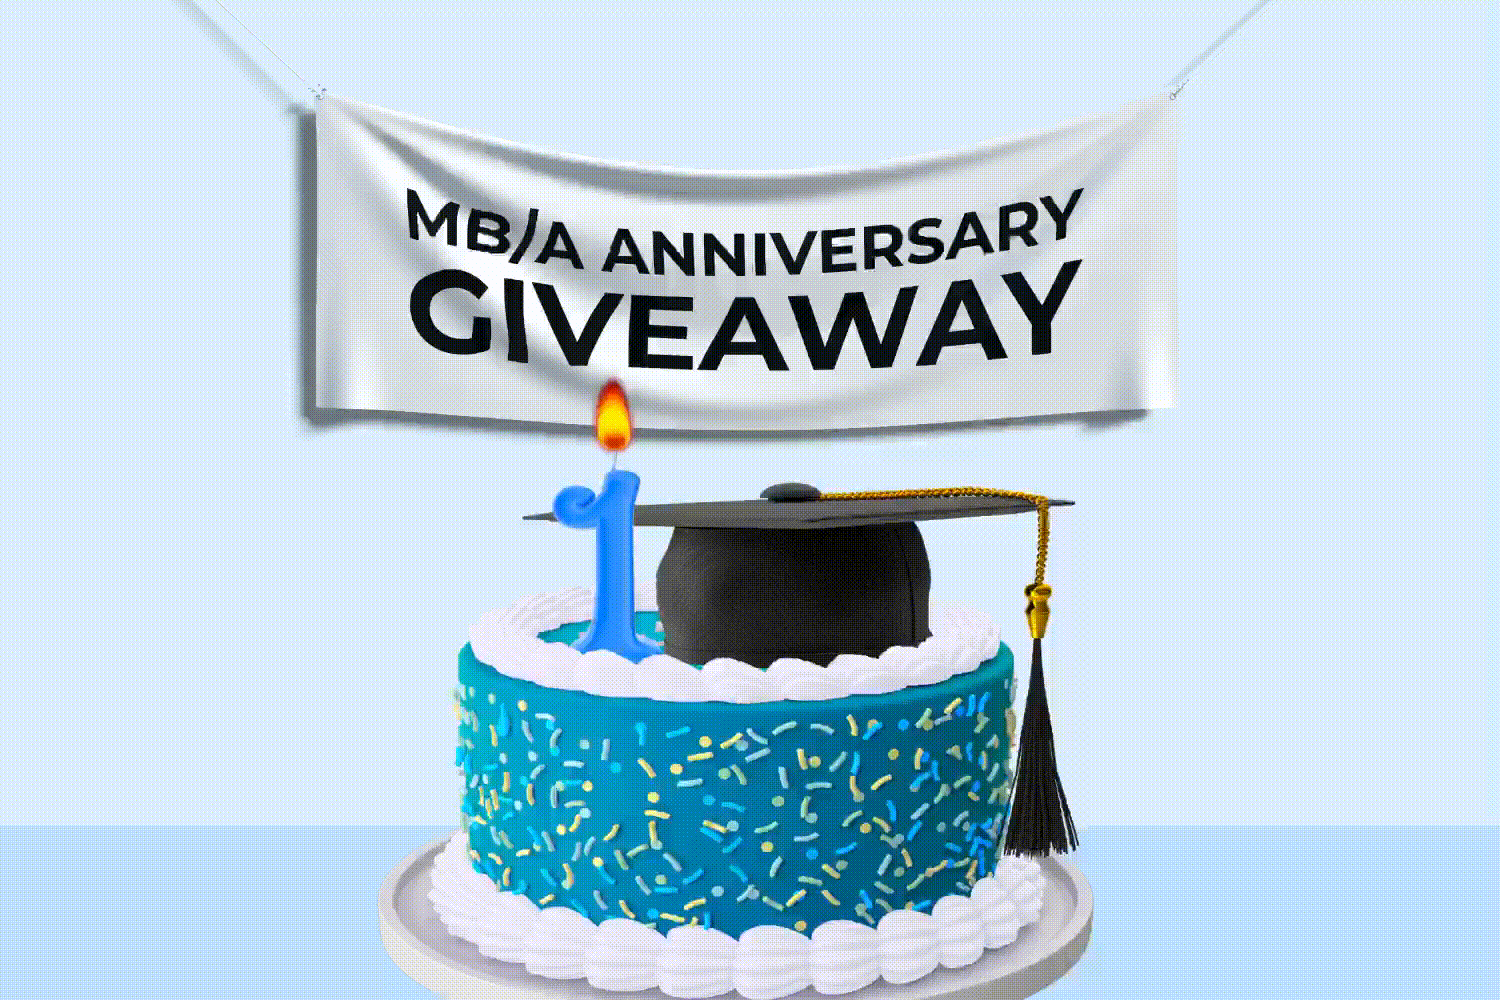 MB/A giveaway anniversary 